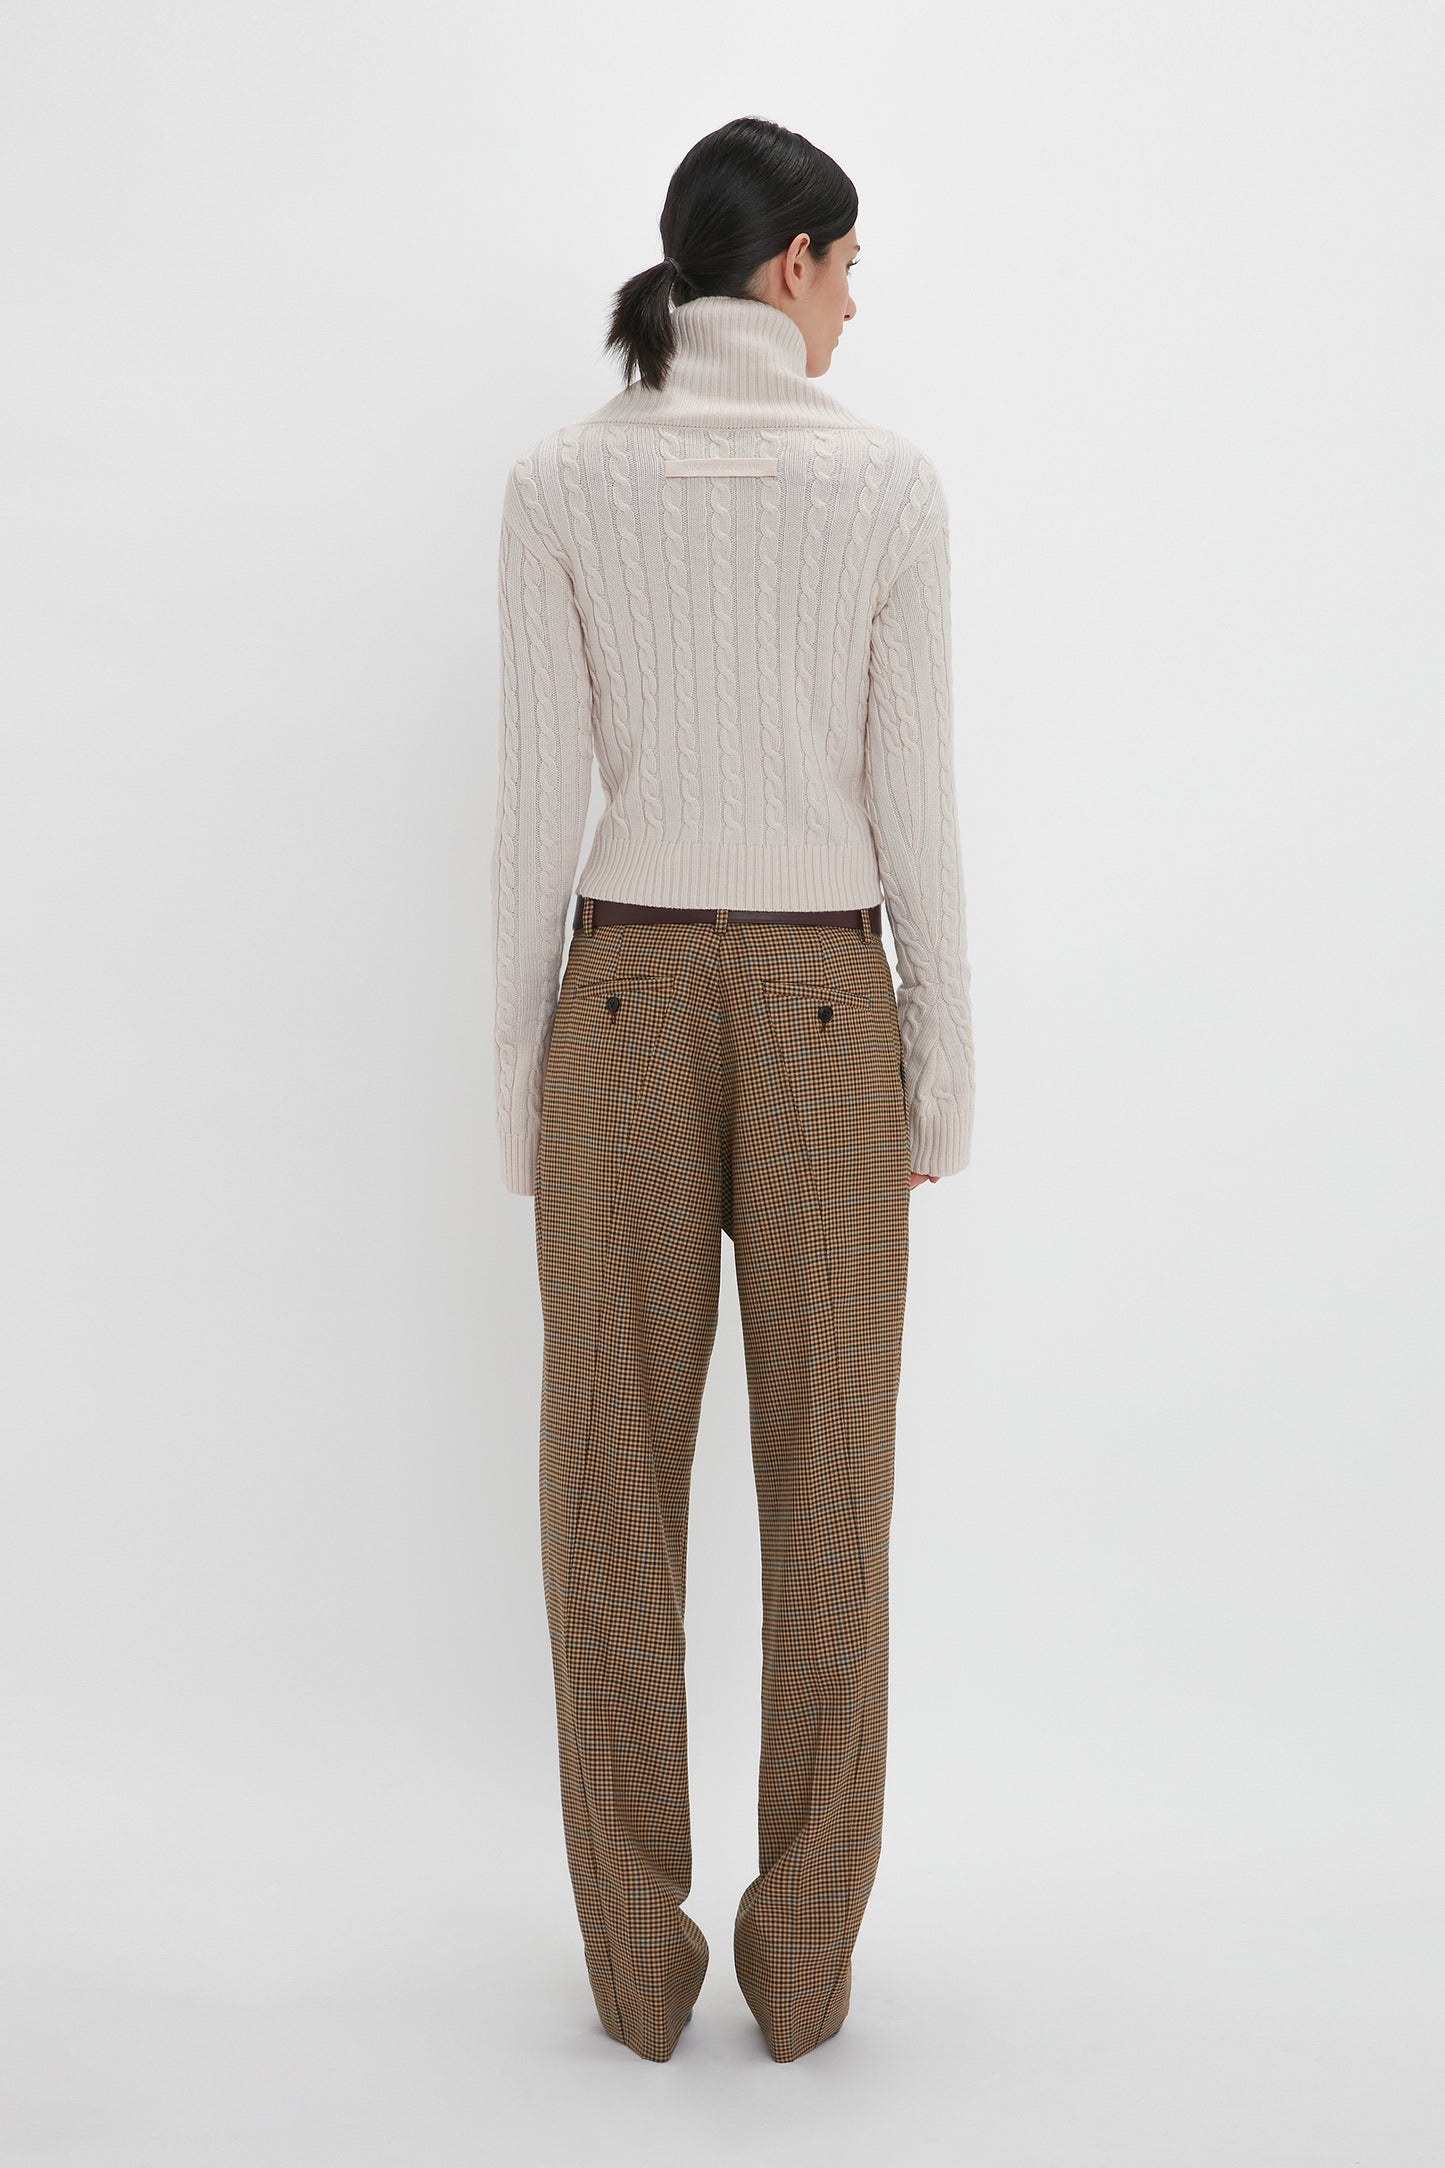 A person stands with their back to the camera, showcasing a Wrap Detail Jumper In Bone by Victoria Beckham, paired with brown plaid trousers.